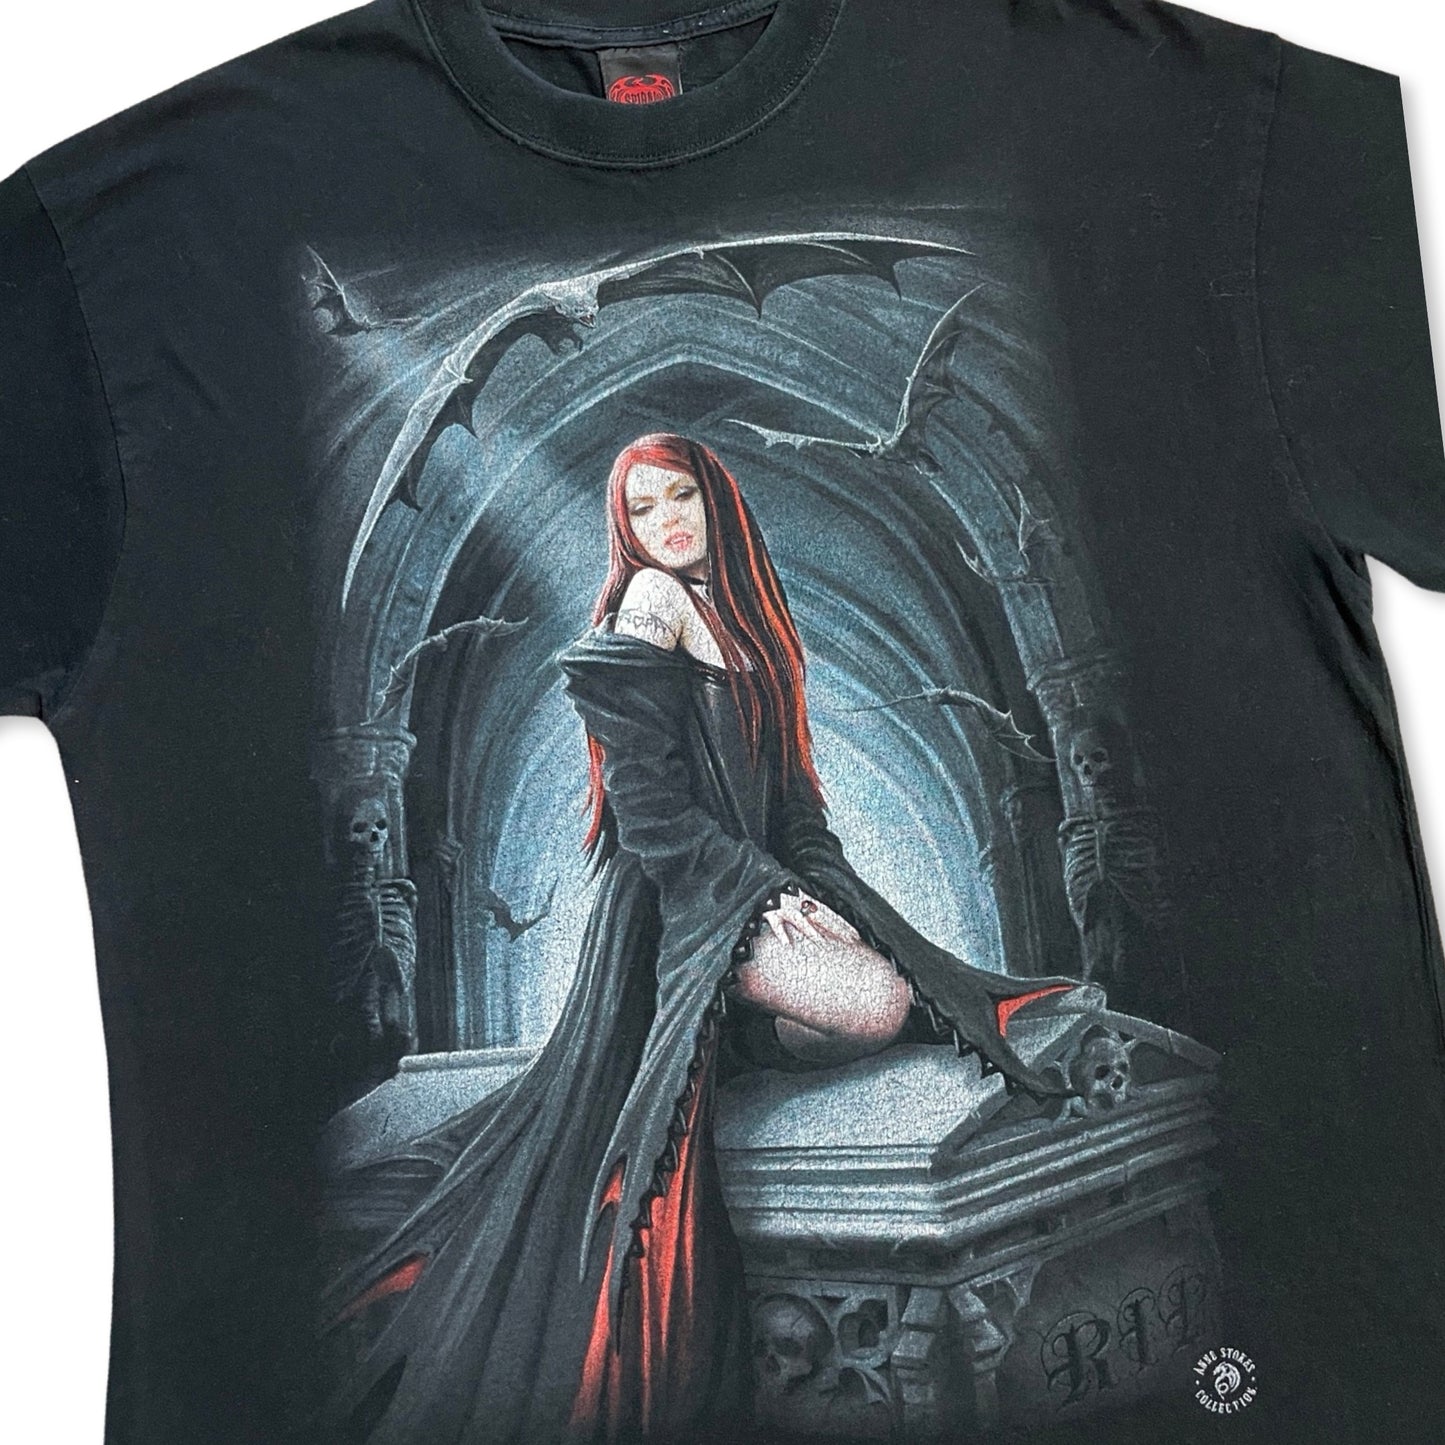 Vintage Lady Vampire Graphic Tee (Fits XL)